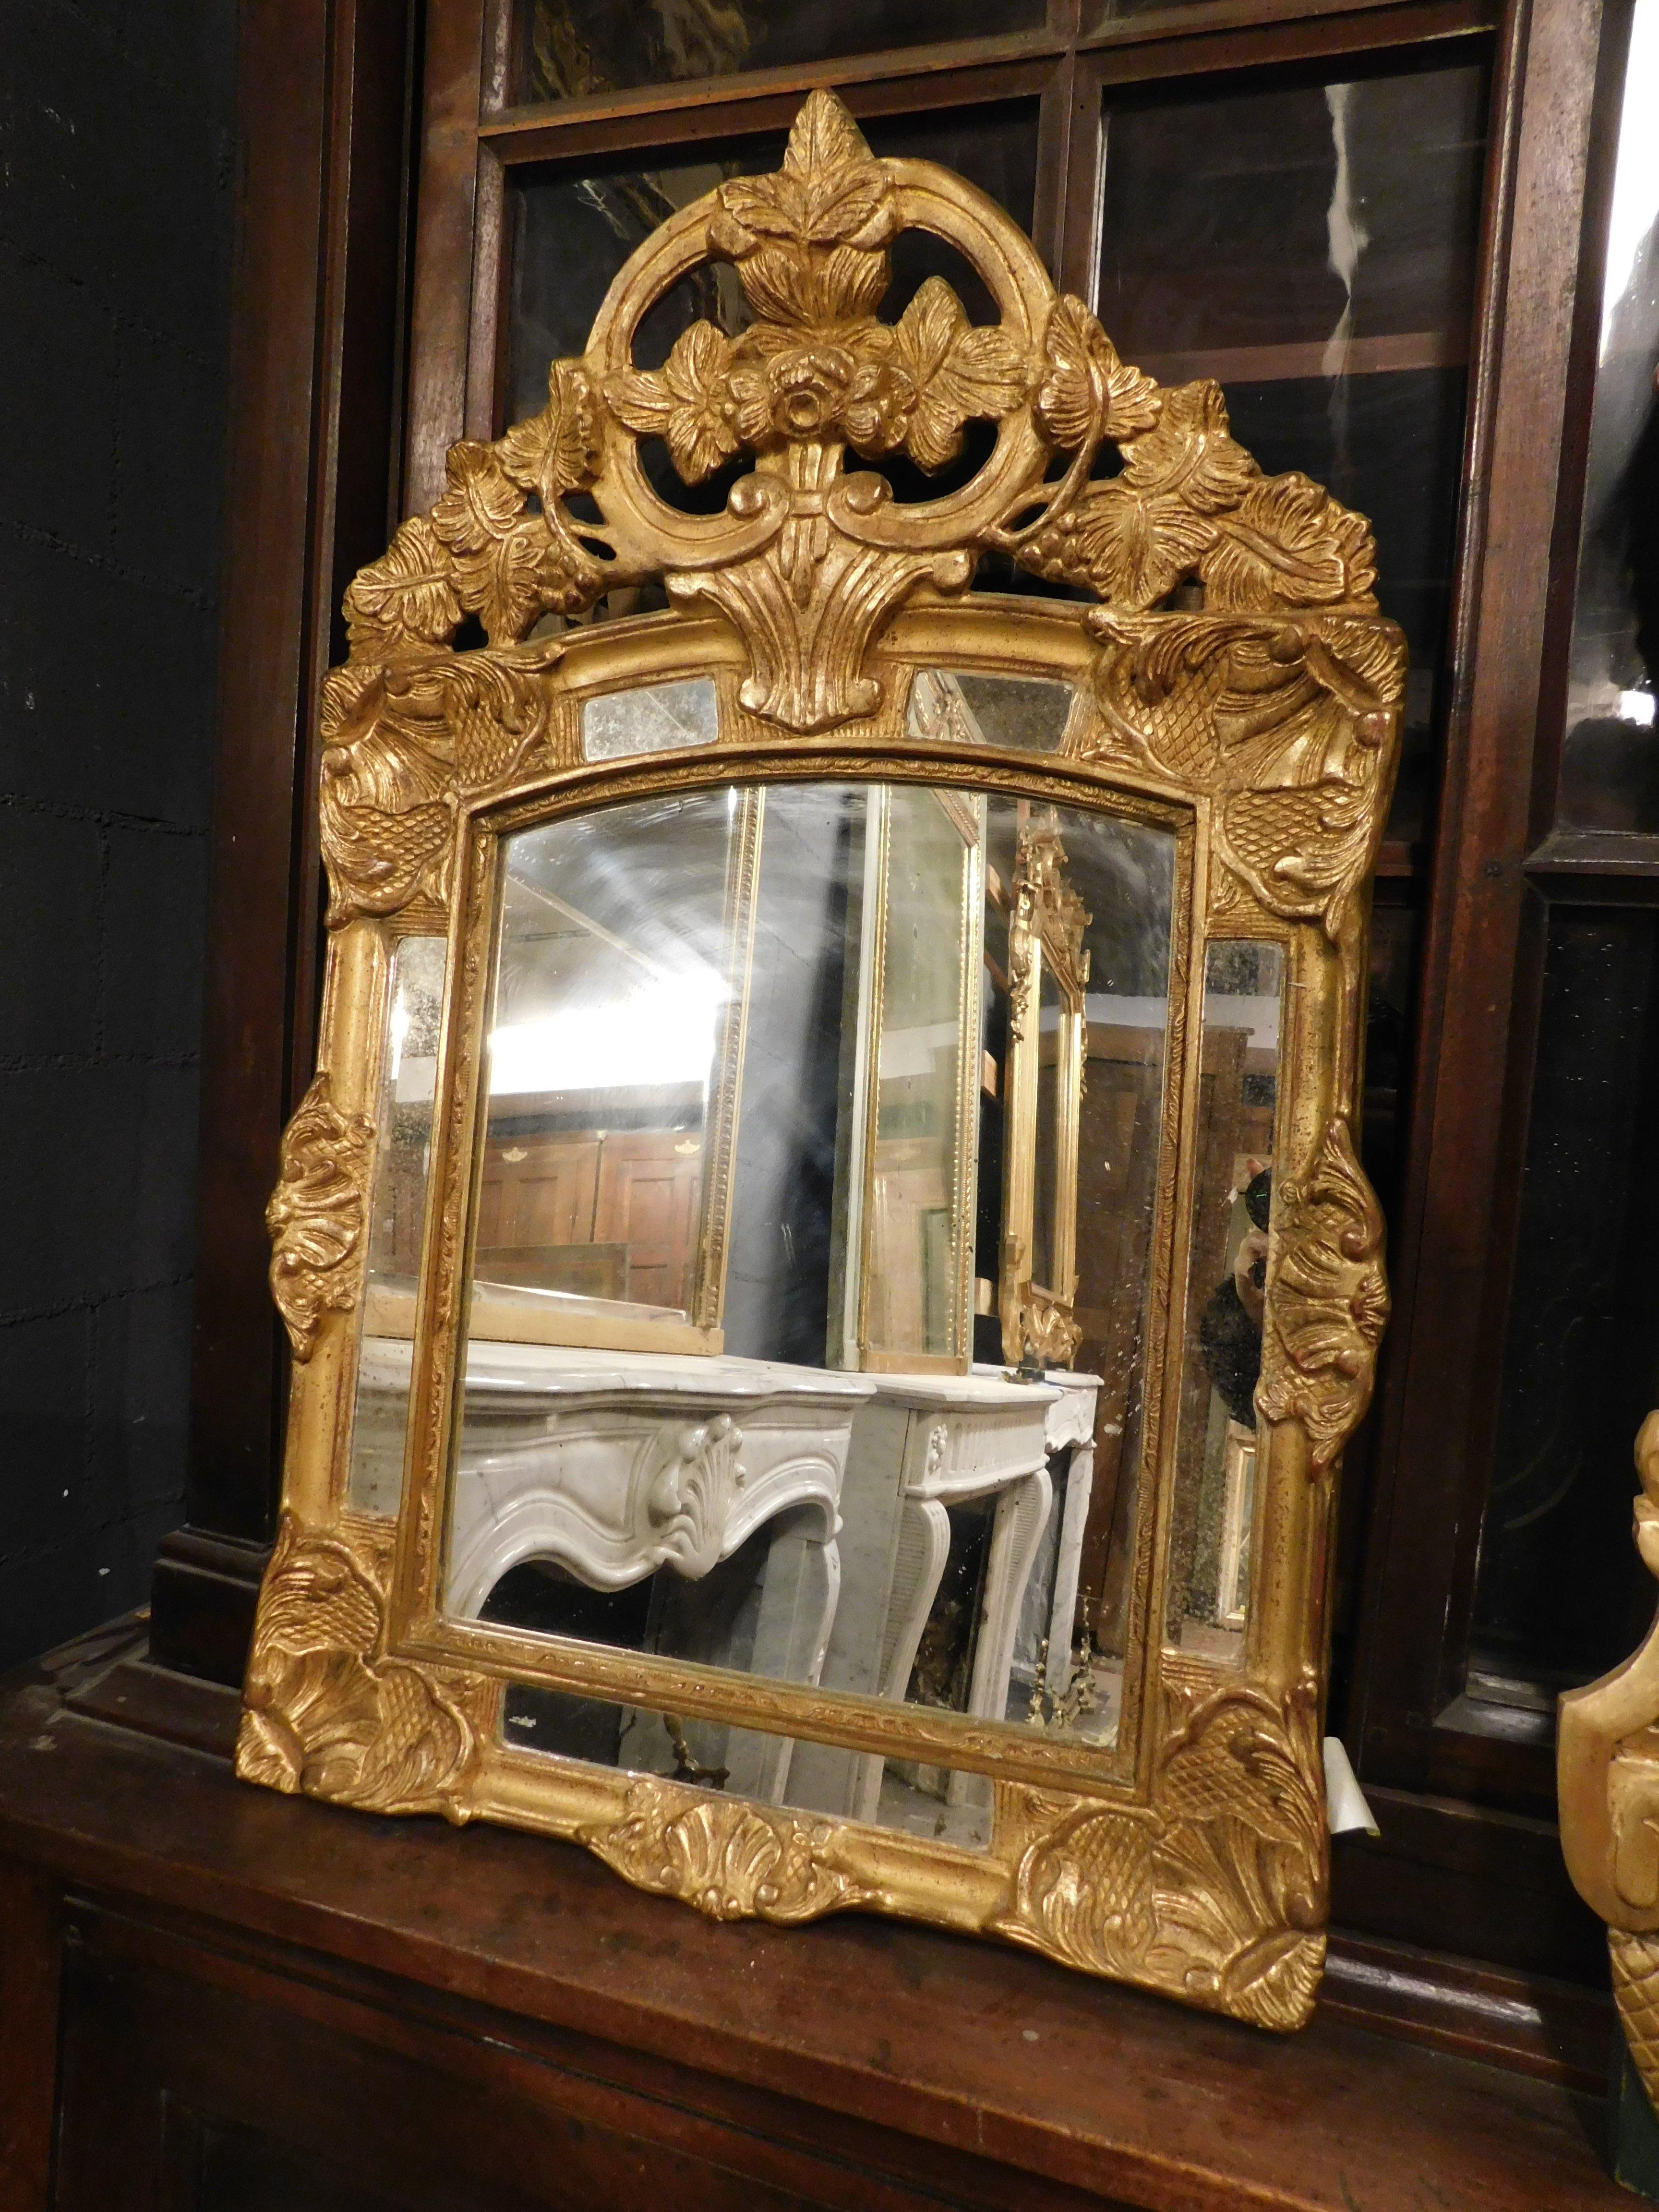 Ancient small mirror, of French origin, gilded with sculptures in the frame and cymatium, beautiful and adaptable anywhere (bathrooms, above furniture, above fireplaces, etc...), from the 19th century.
Maximum measures cm w 55 x H 83.